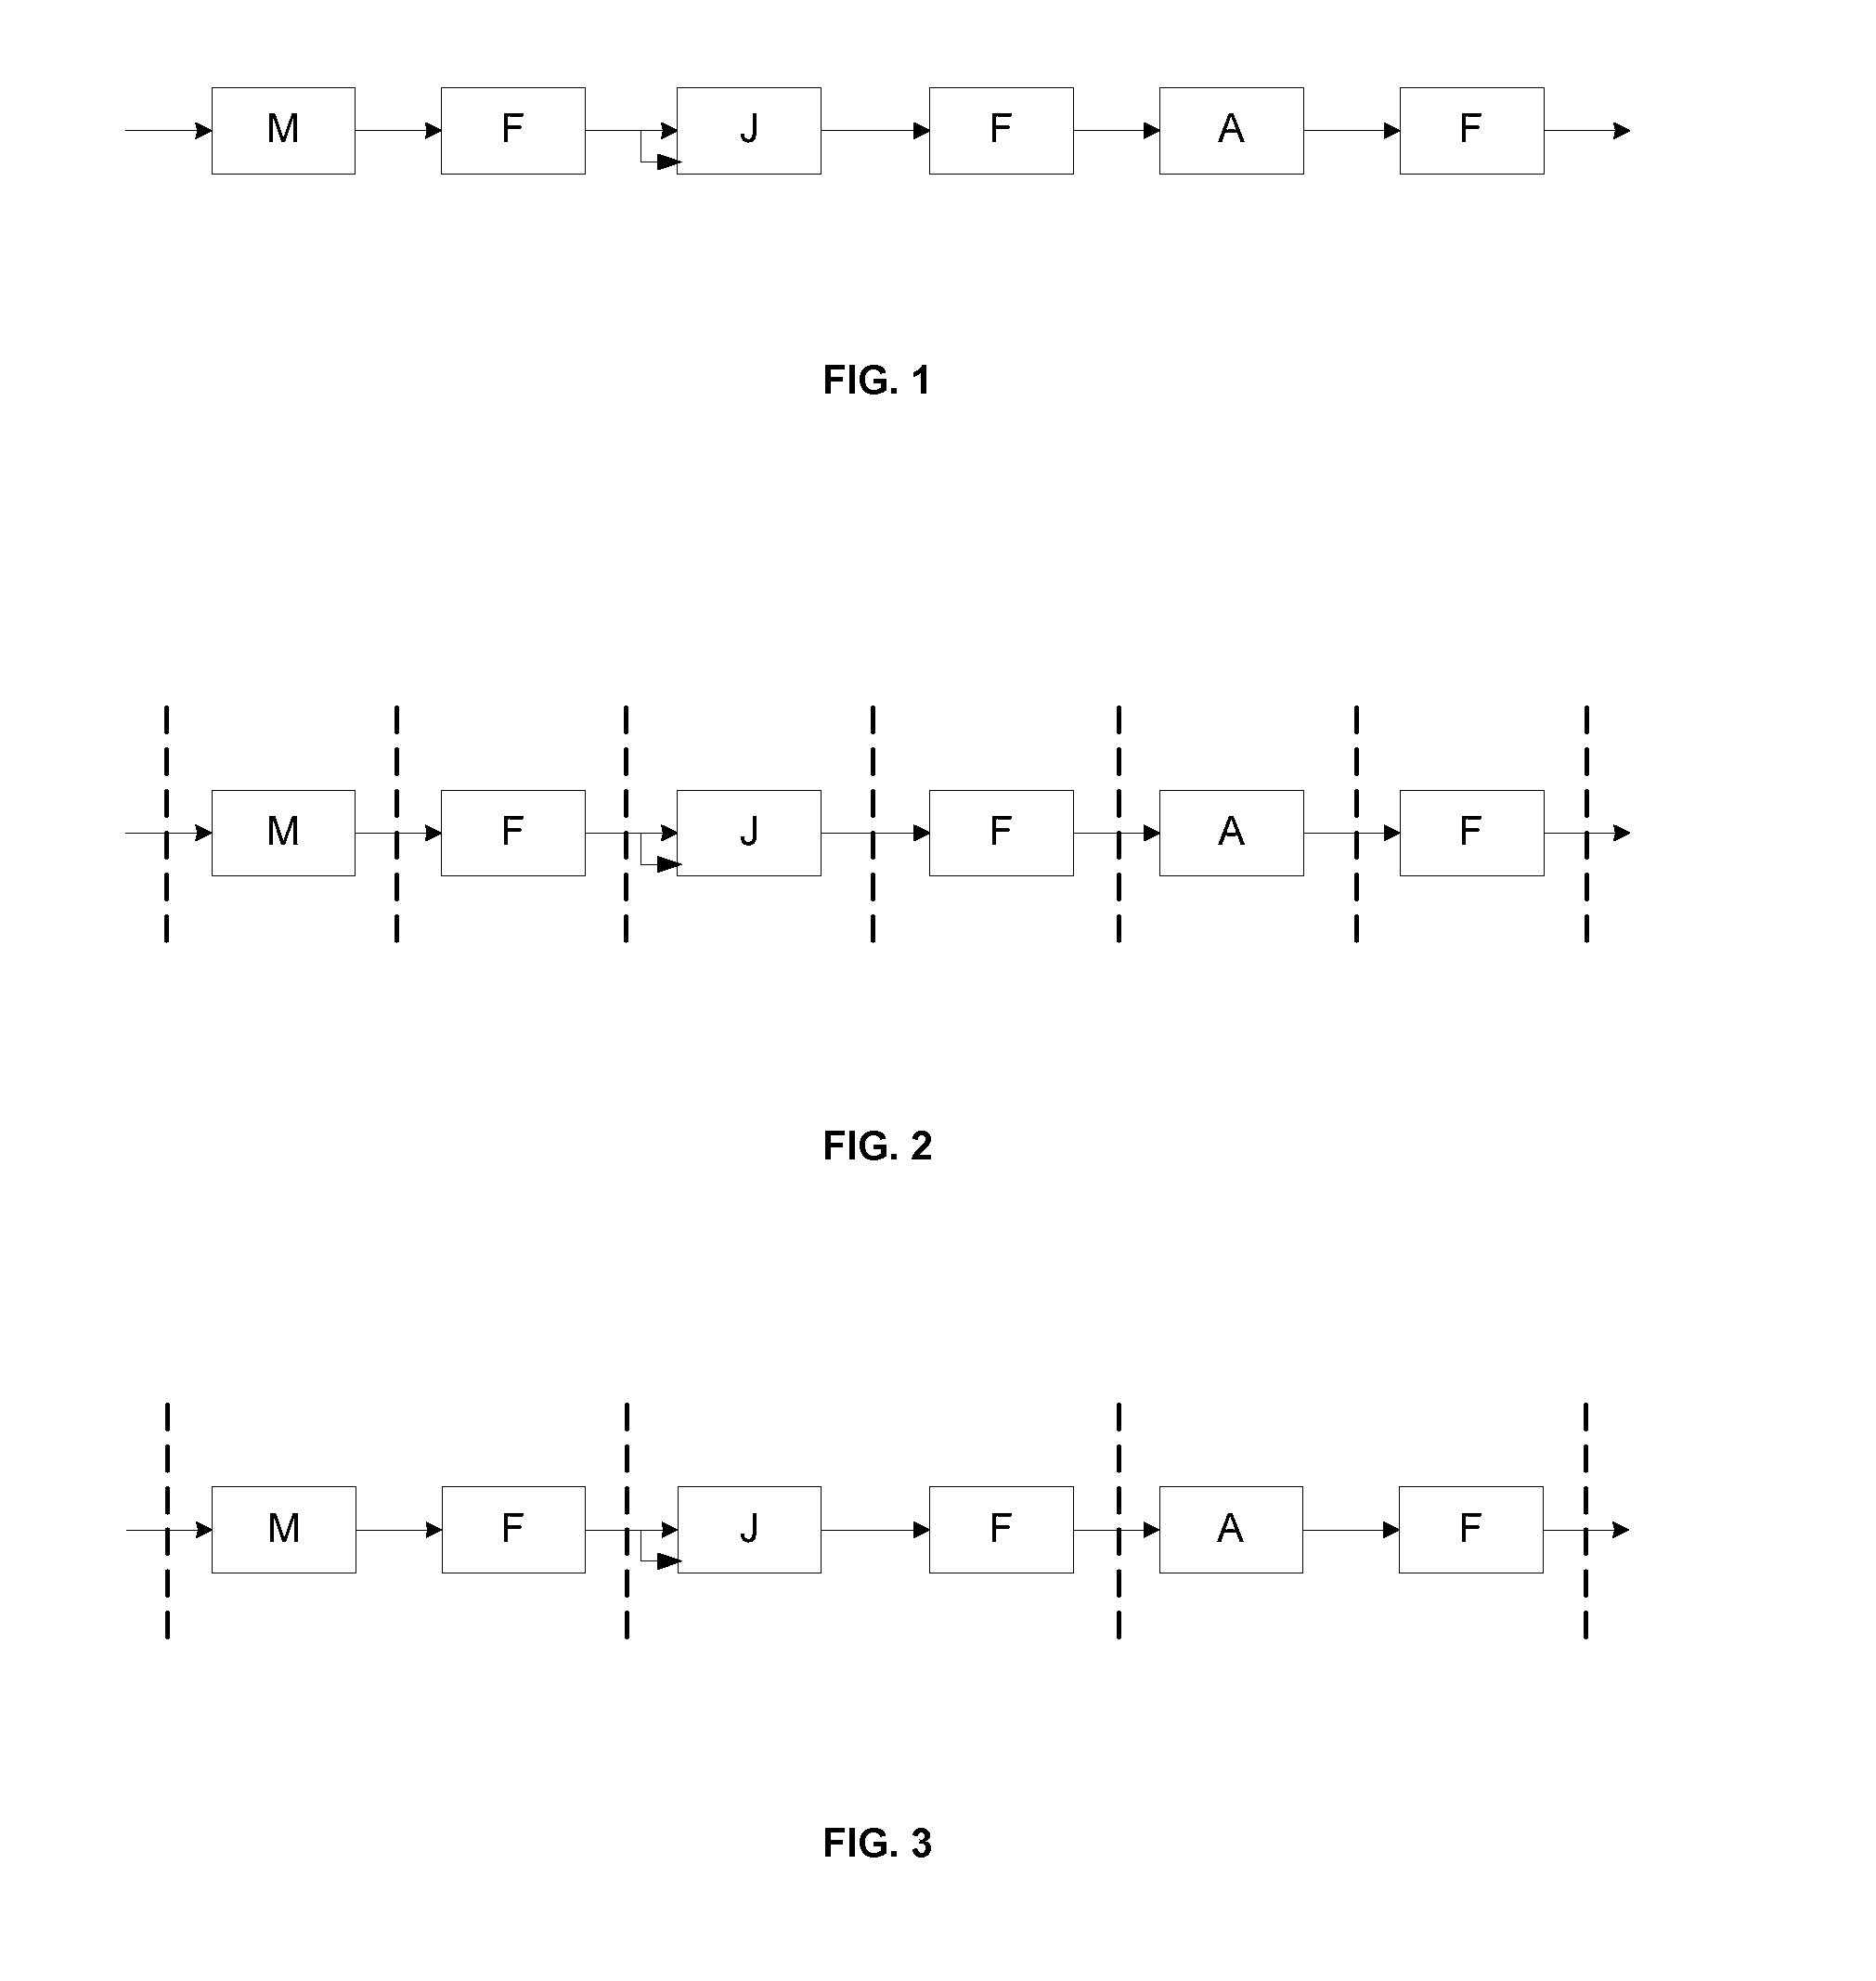 Parallel processing of continuous queries on data streams